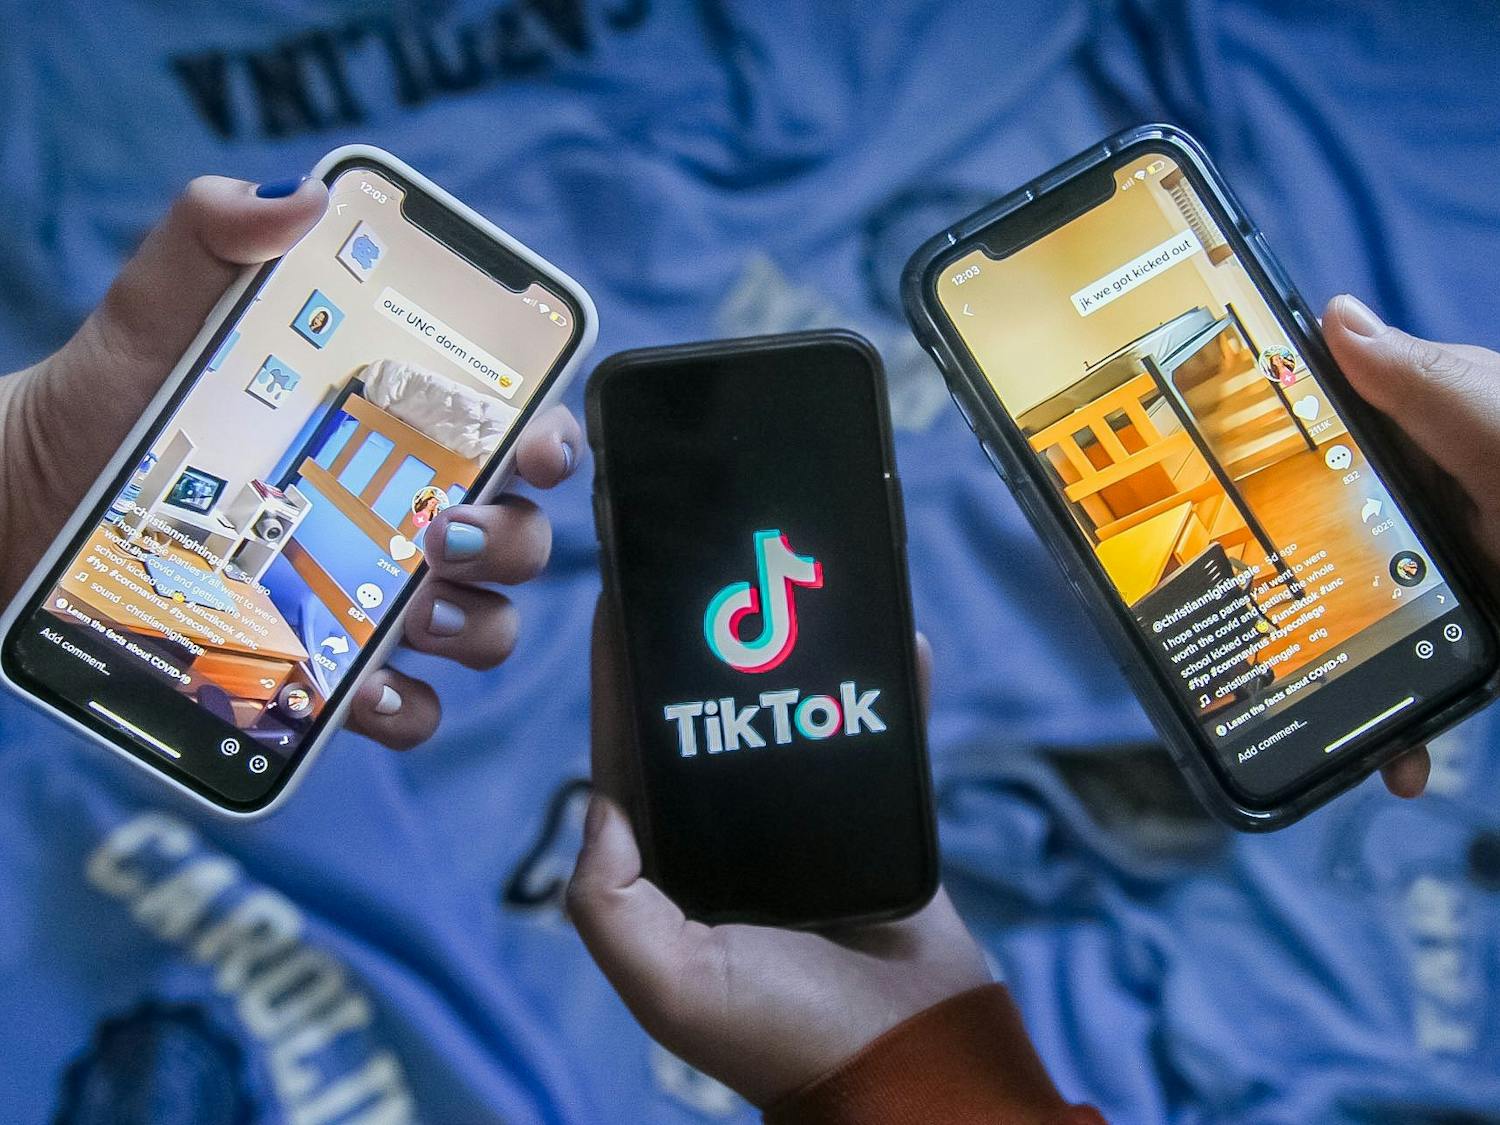 DTH Photo Illustration. "Ratatouille: The TikTok the Musical" is “the first crowd-sourced musical,” created during quarantine by TikTok users using the hashtag #ratatouillemusical.